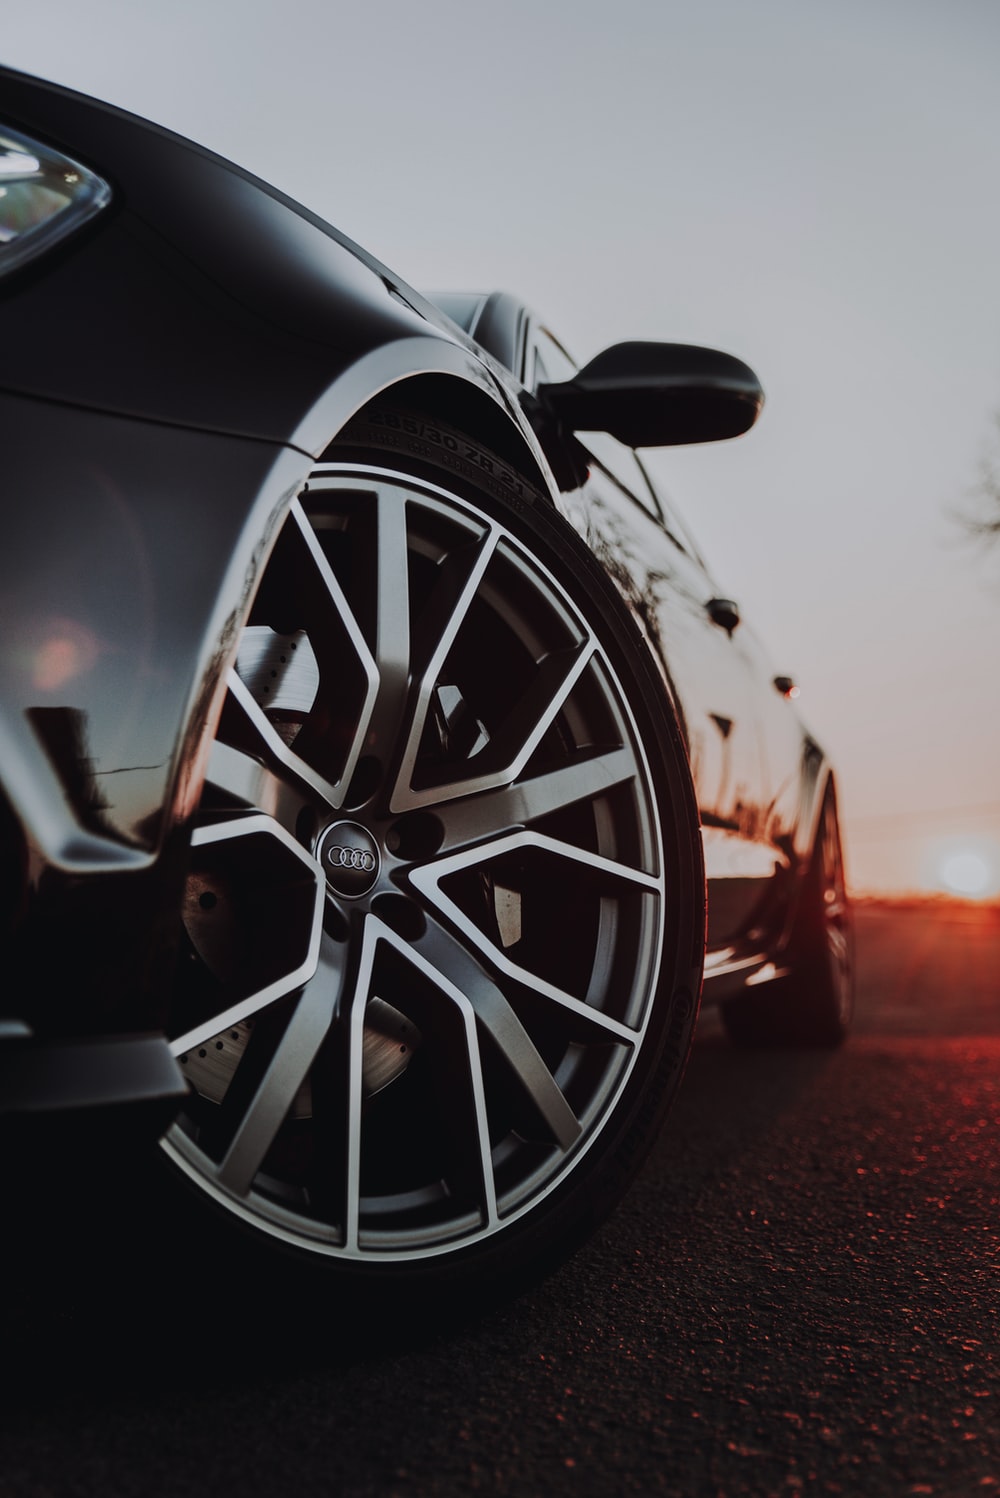 Car Wheel Picture. Download Free Image